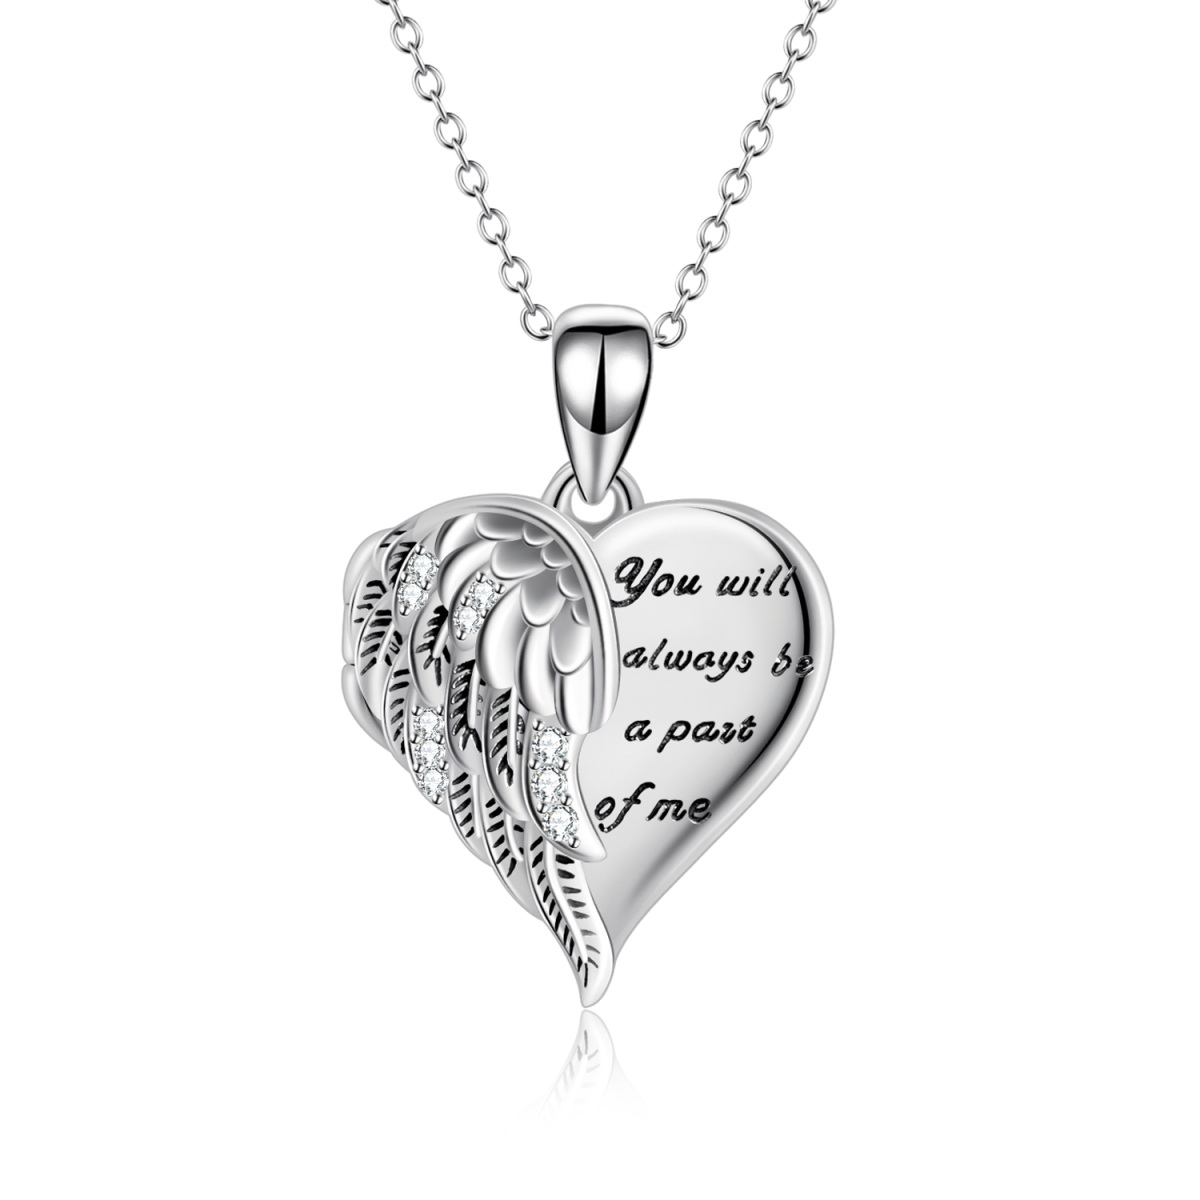 Sterling Silver Heart Angel Wing Personalized Photo Locket Necklace with Engraving Word-1